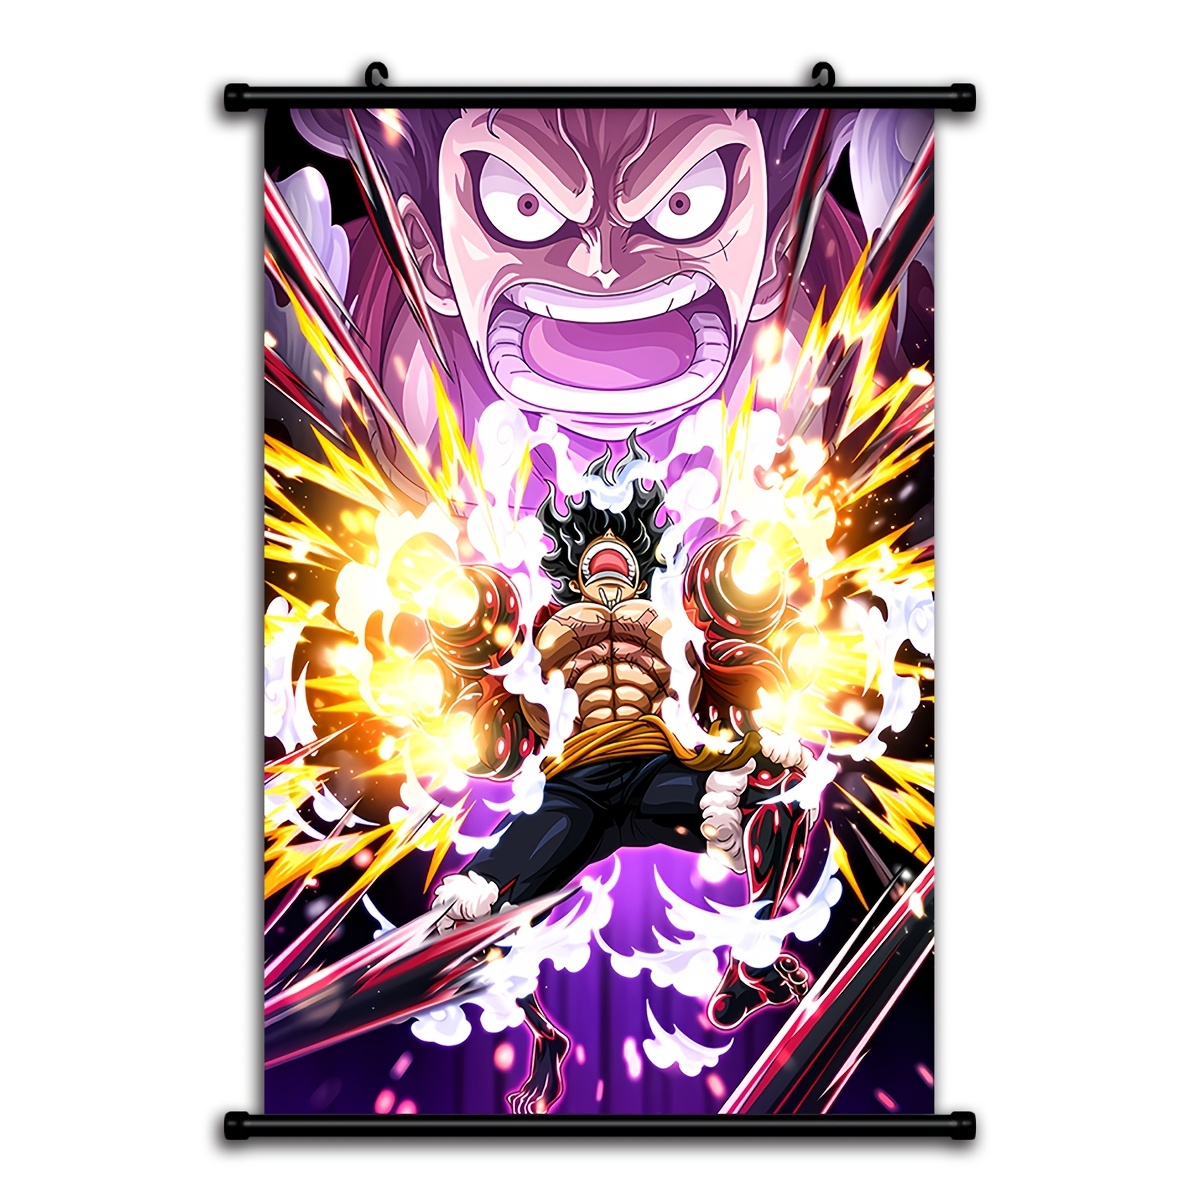 One Piece Luffy Anime HD Print Wall Poster Scroll Home Decor